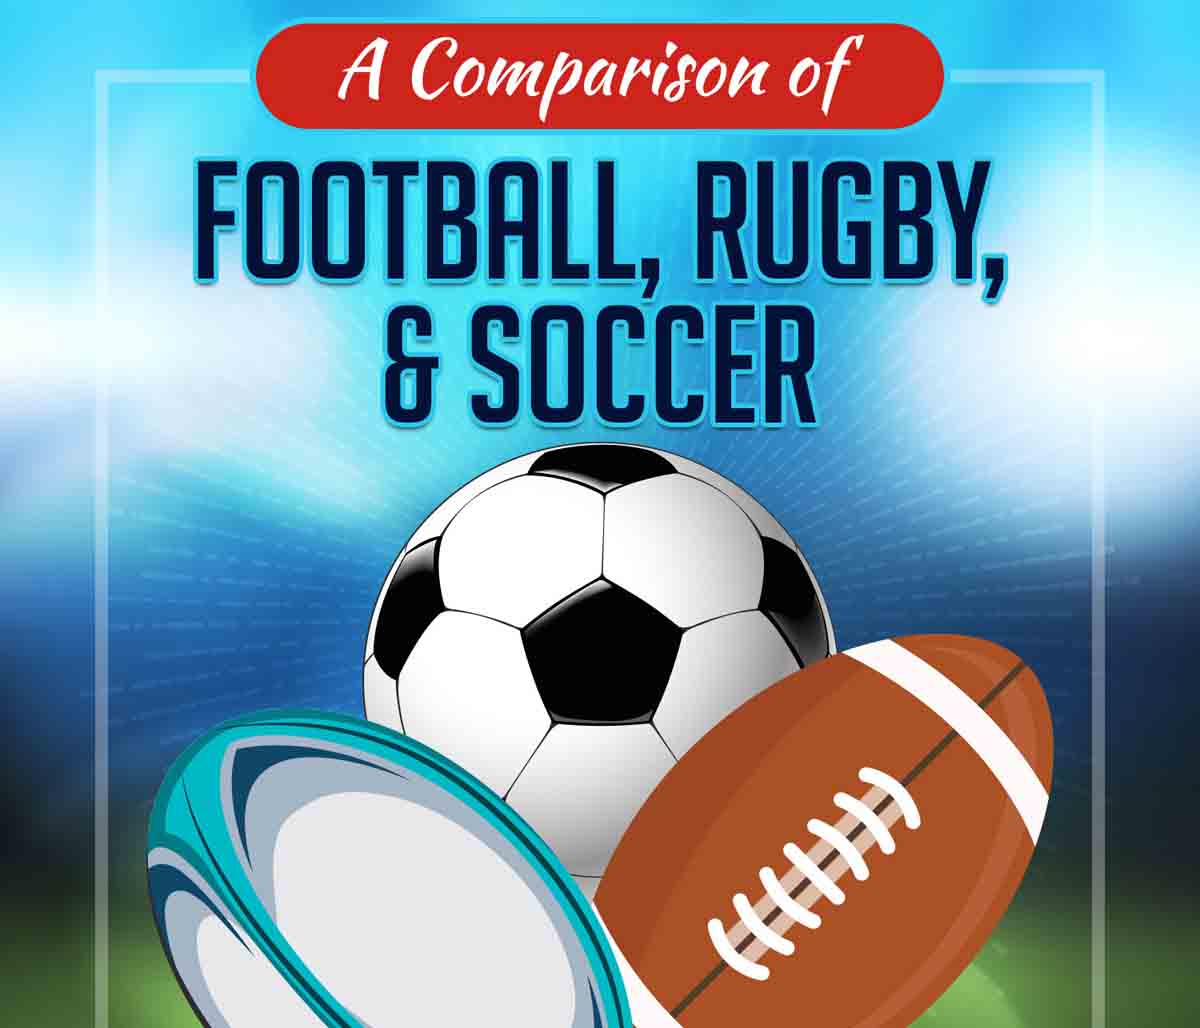 Comparison of Football, Rugby, and Soccer